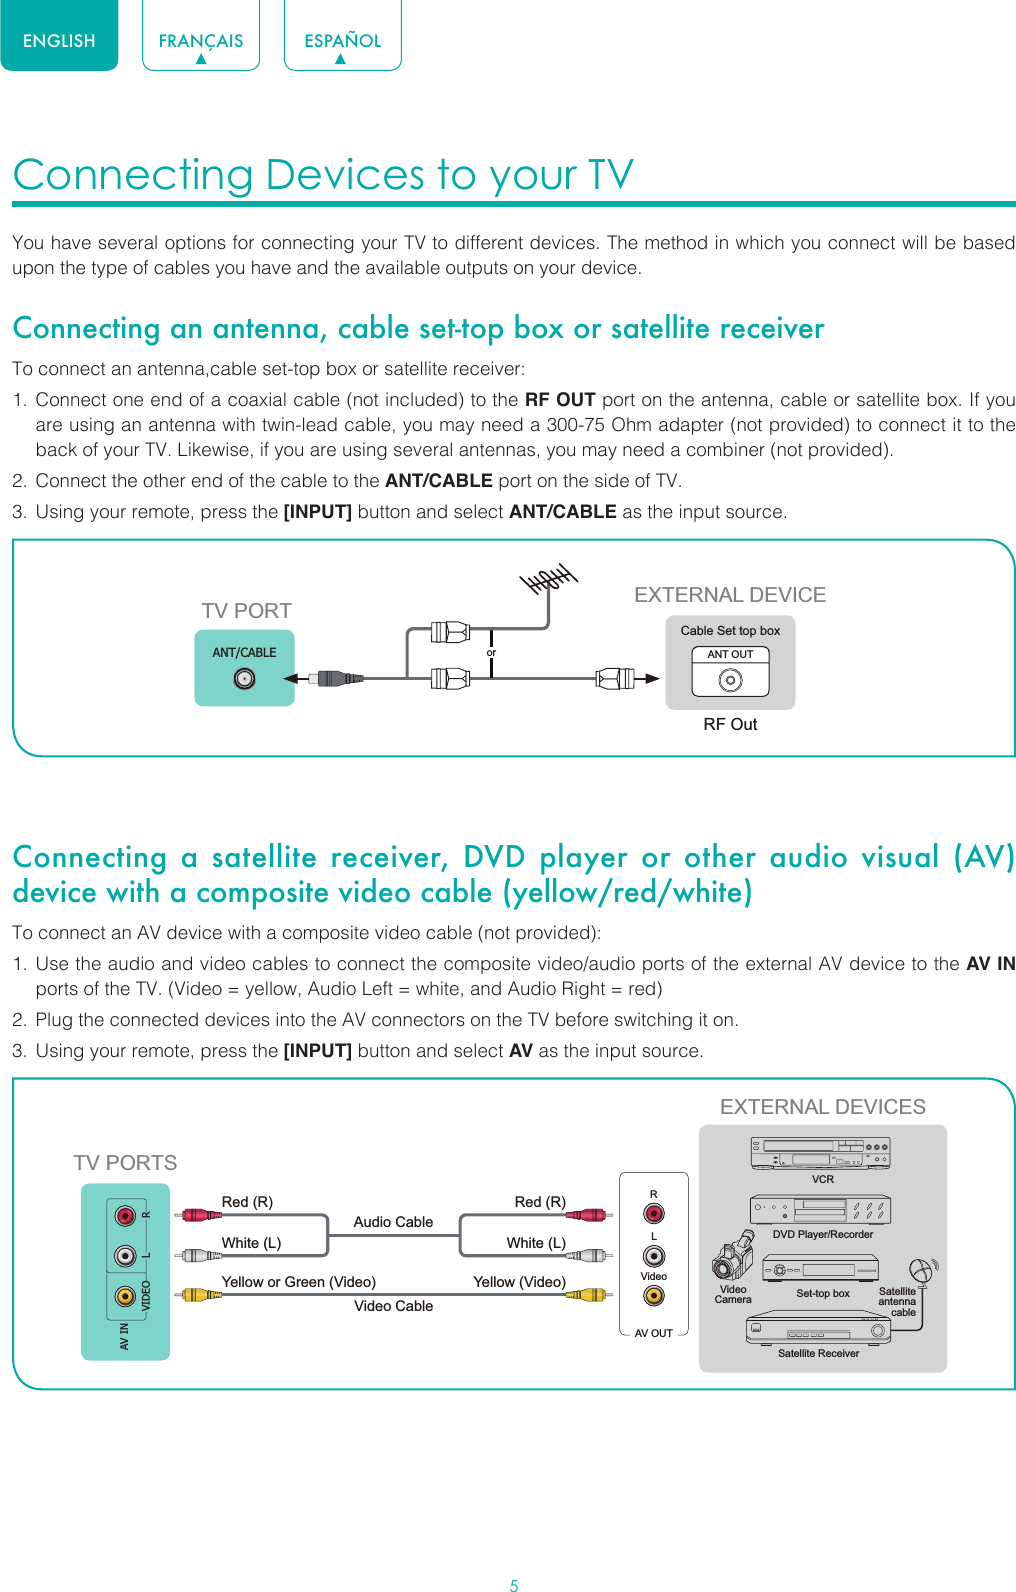 5ENGLISH FRANÇAIS ESPAÑOLConnecting Devices to your TV You have several options for connecting your TV to different devices. The method in which you connect will be based upon the type of cables you have and the available outputs on your device.Connecting an antenna, cable set-top box or satellite receiverTo connect an antenna,cable set-top box or satellite receiver: 1.  Connect one end of a coaxial cable (not included) to the RF OUT port on the antenna, cable or satellite box. If you are using an antenna with twin-lead cable, you may need a 300-75 Ohm adapter (not provided) to connect it to the back of your TV. Likewise, if you are using several antennas, you may need a combiner (not provided).2.  Connect the other end of the cable to the ANT/CABLE port on the side of TV.3.  Using your remote, press the [INPUT] button and select ANT/CABLE as the input source. Connecting a satellite receiver, DVD player or other audio visual (AV) device with a composite video cable (yellow/red/white)To connect an AV device with a composite video cable (not provided):1.  Use the audio and video cables to connect the composite video/audio ports of the external AV device to the AV IN ports of the TV. (Video = yellow, Audio Left = white, and Audio Right = red)2.  Plug the connected devices into the AV connectors on the TV before switching it on.3.  Using your remote, press the [INPUT] button and select AV as the input source.or ANT OUTCable Set top boxRF OutEXTERNAL DEVICETV PORTANT/CABLEAV OUTVideoLRWhite (L)White (L)Yellow (Video)Yellow or Green (Video)Video CableRed (R)Red (R)Audio Cable TV PORTSEXTERNAL DEVICESDVD Player/RecorderVideo Camera Set-top boxSatellite ReceiverSatellite antenna cableVCRVIDEOL RAV IN